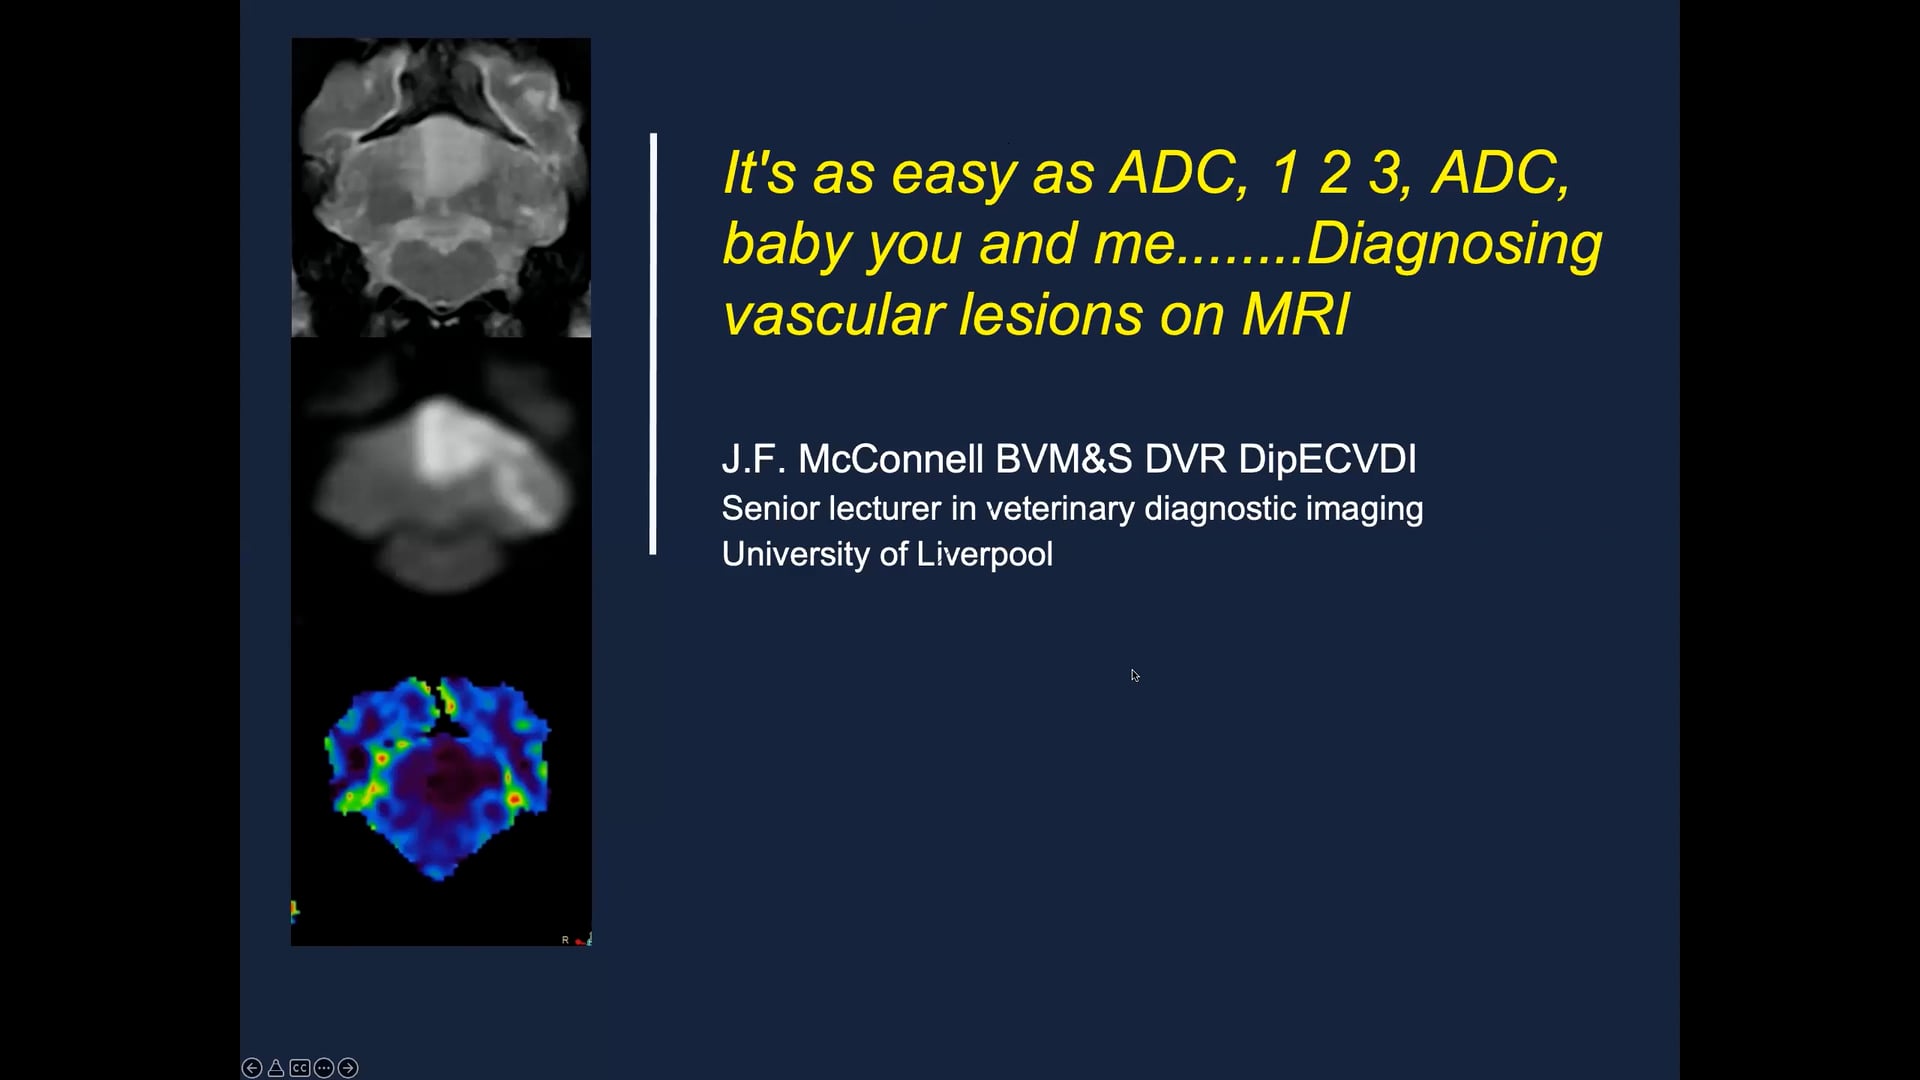 It's as easy as ADC, 1 2 3, ADC,  baby you and me........Diagnosing vascular lesions on MRI